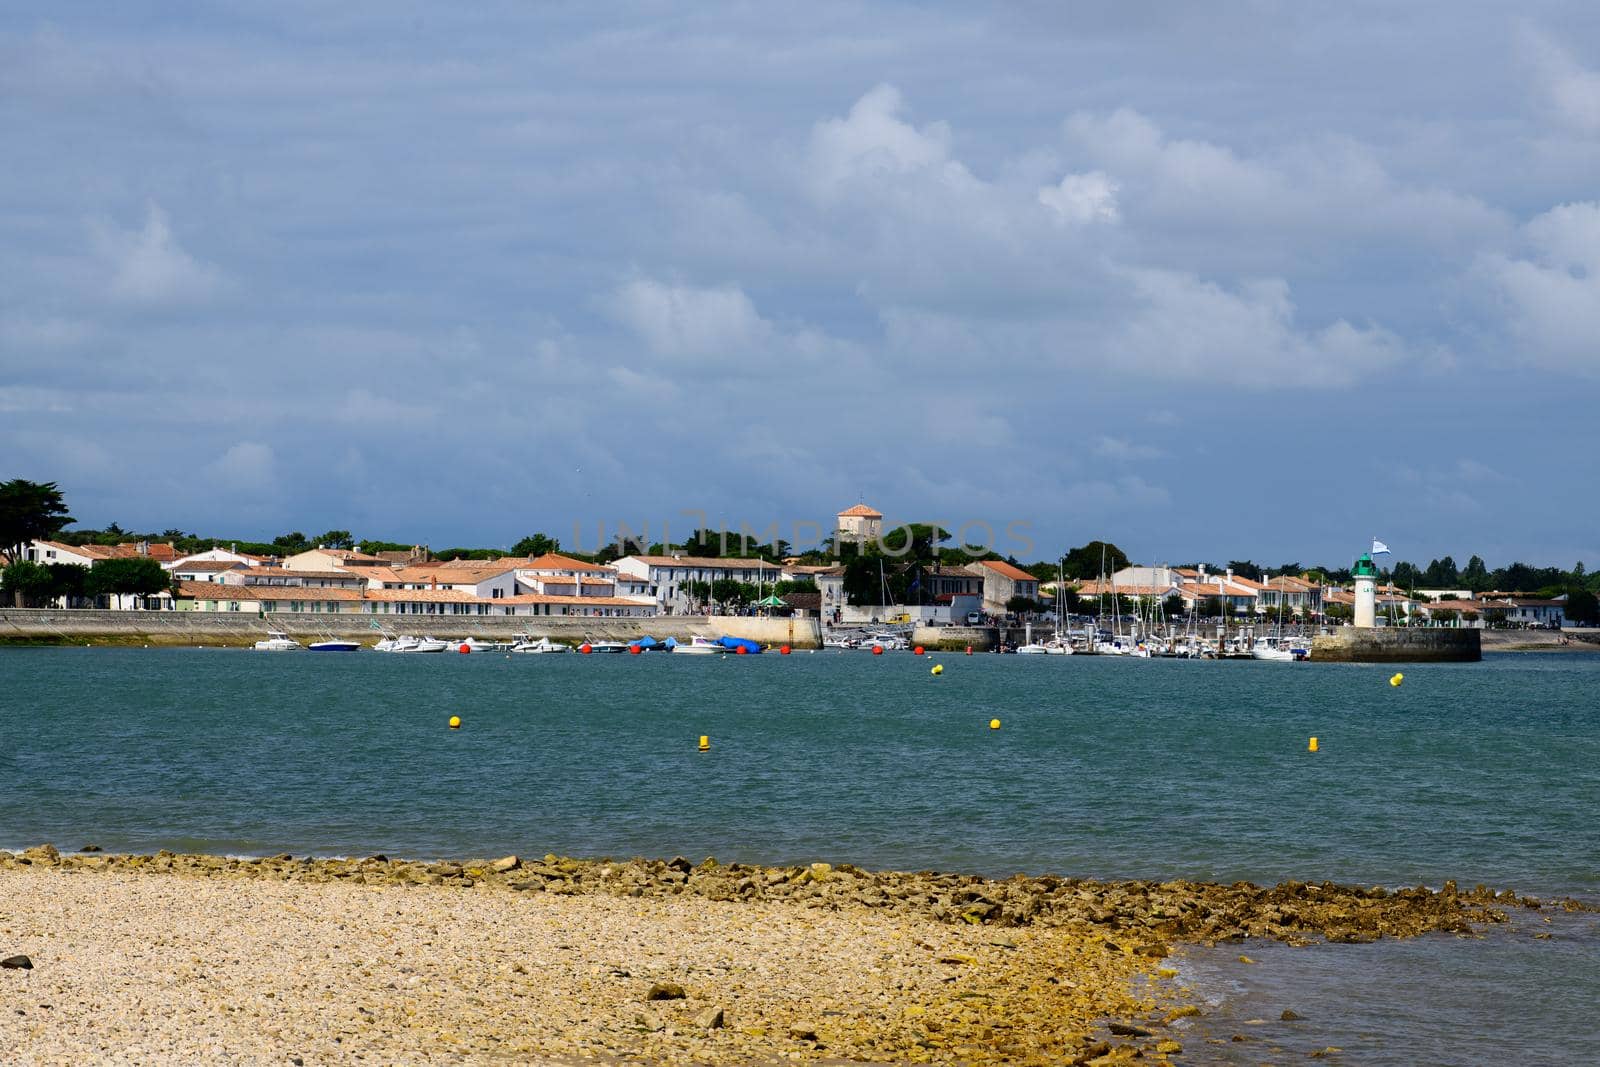 View on the Phare de la Flotte and some boats on the sea from the beach plage de l' Arnérault on a sunny summerday with the city in the background